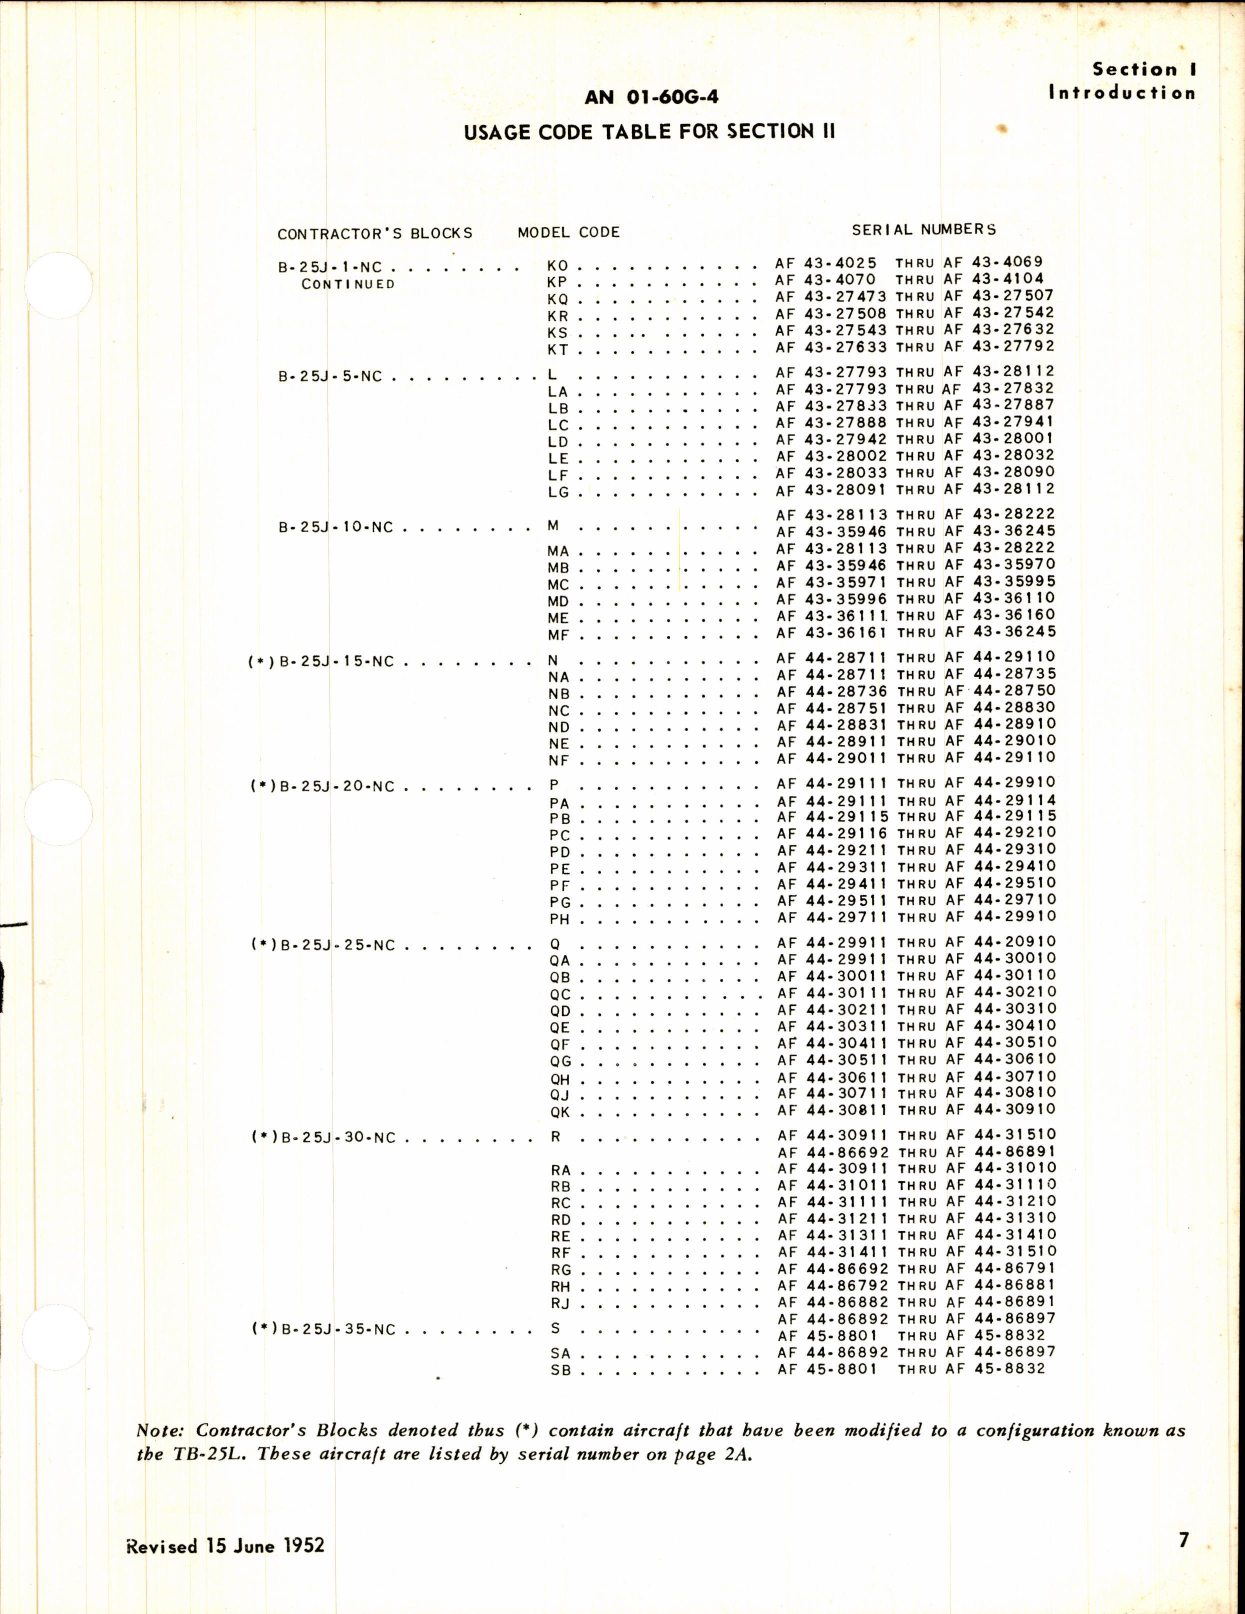 Sample page 9 from AirCorps Library document: Parts Catalog for B-25H and B-25J